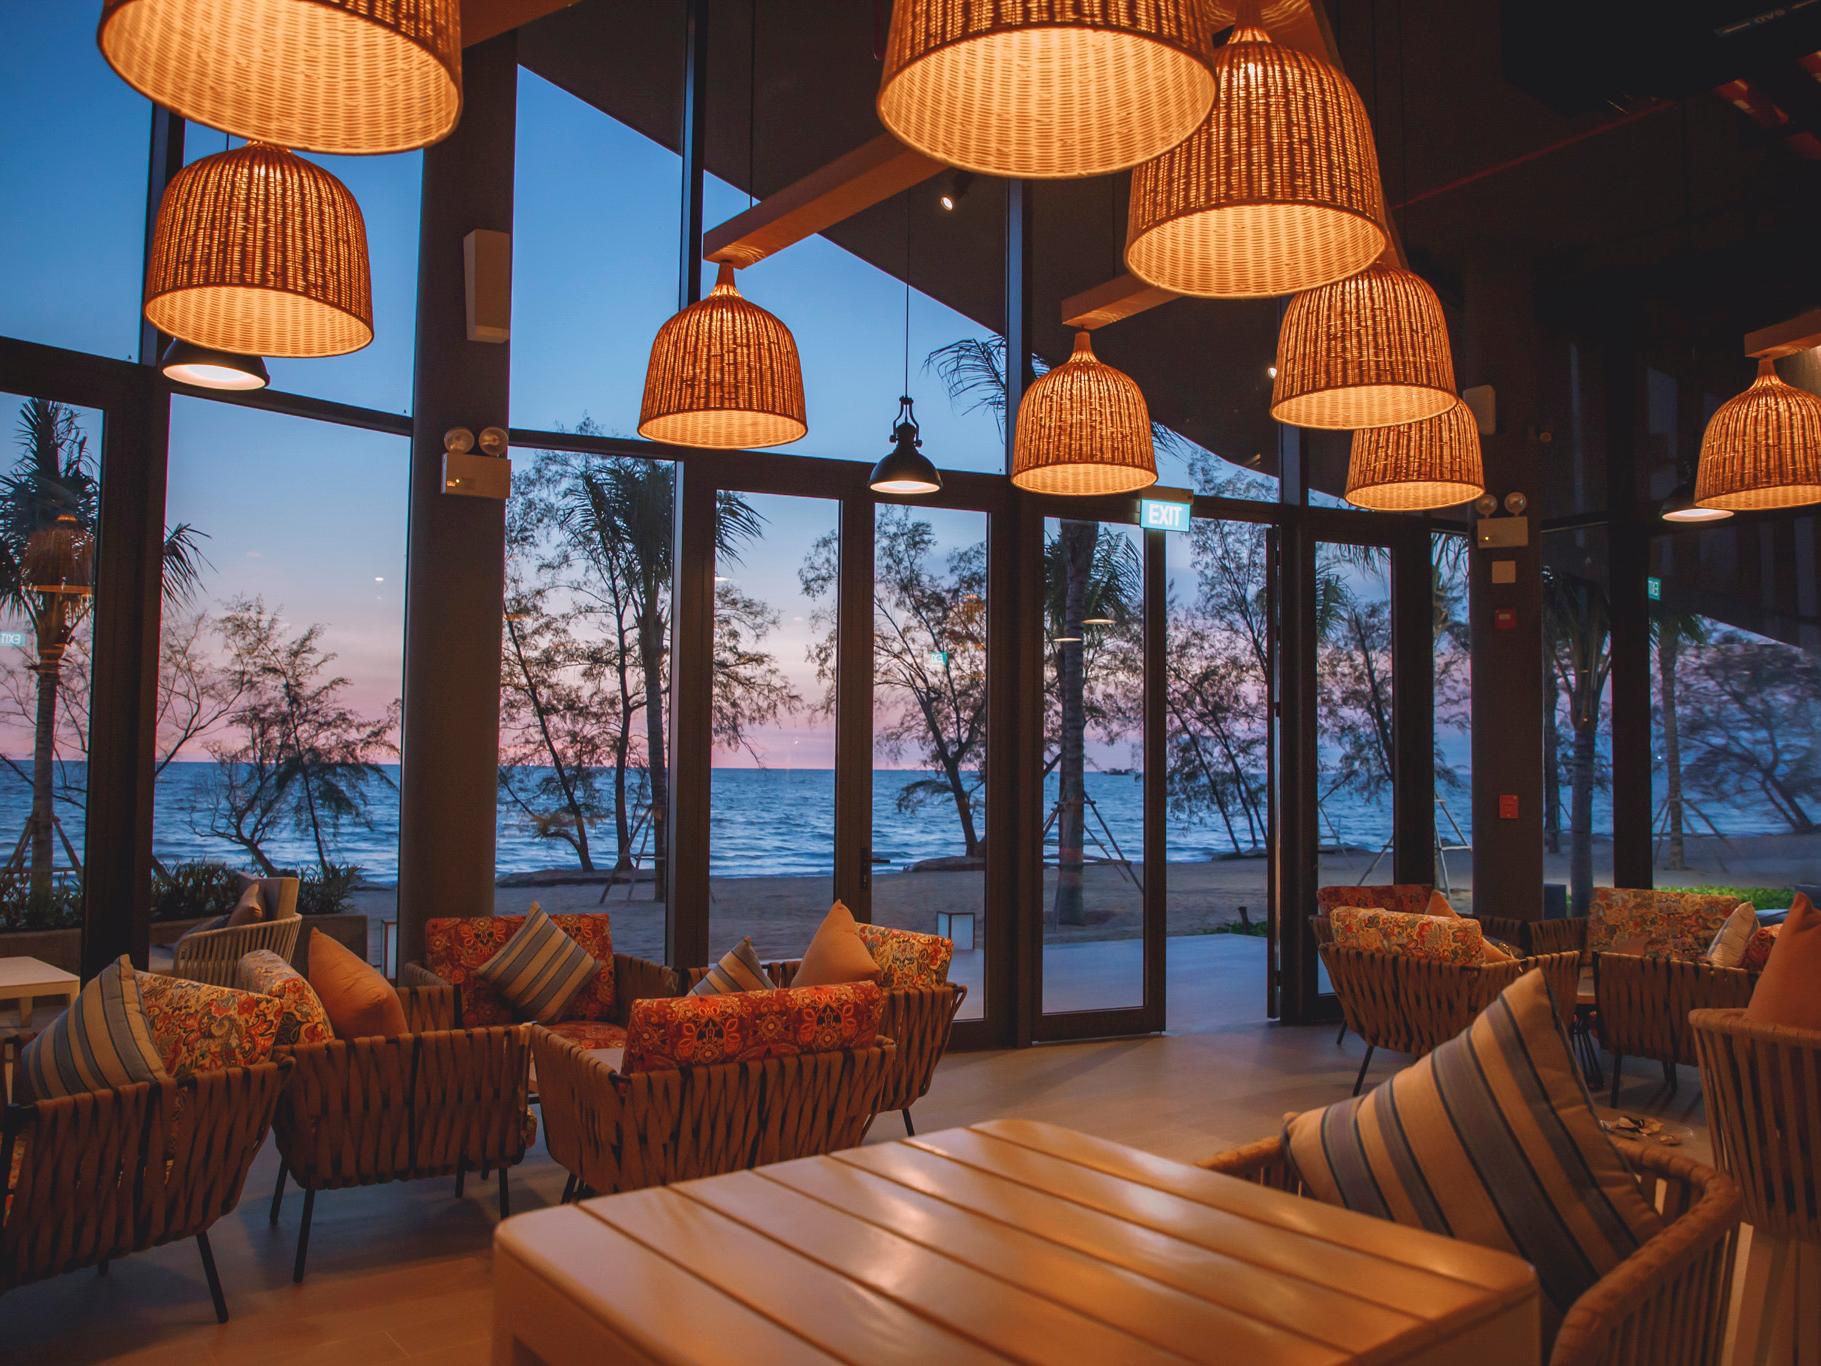 Fast becoming the island's foremost chillout destination overlooking the spectacular Phu Quoc sunset, Amber Sands Beach Club offers the best beachfront dining experience with delectable cuisine prepared in an open fire (Josper) oven and charcoal grill.